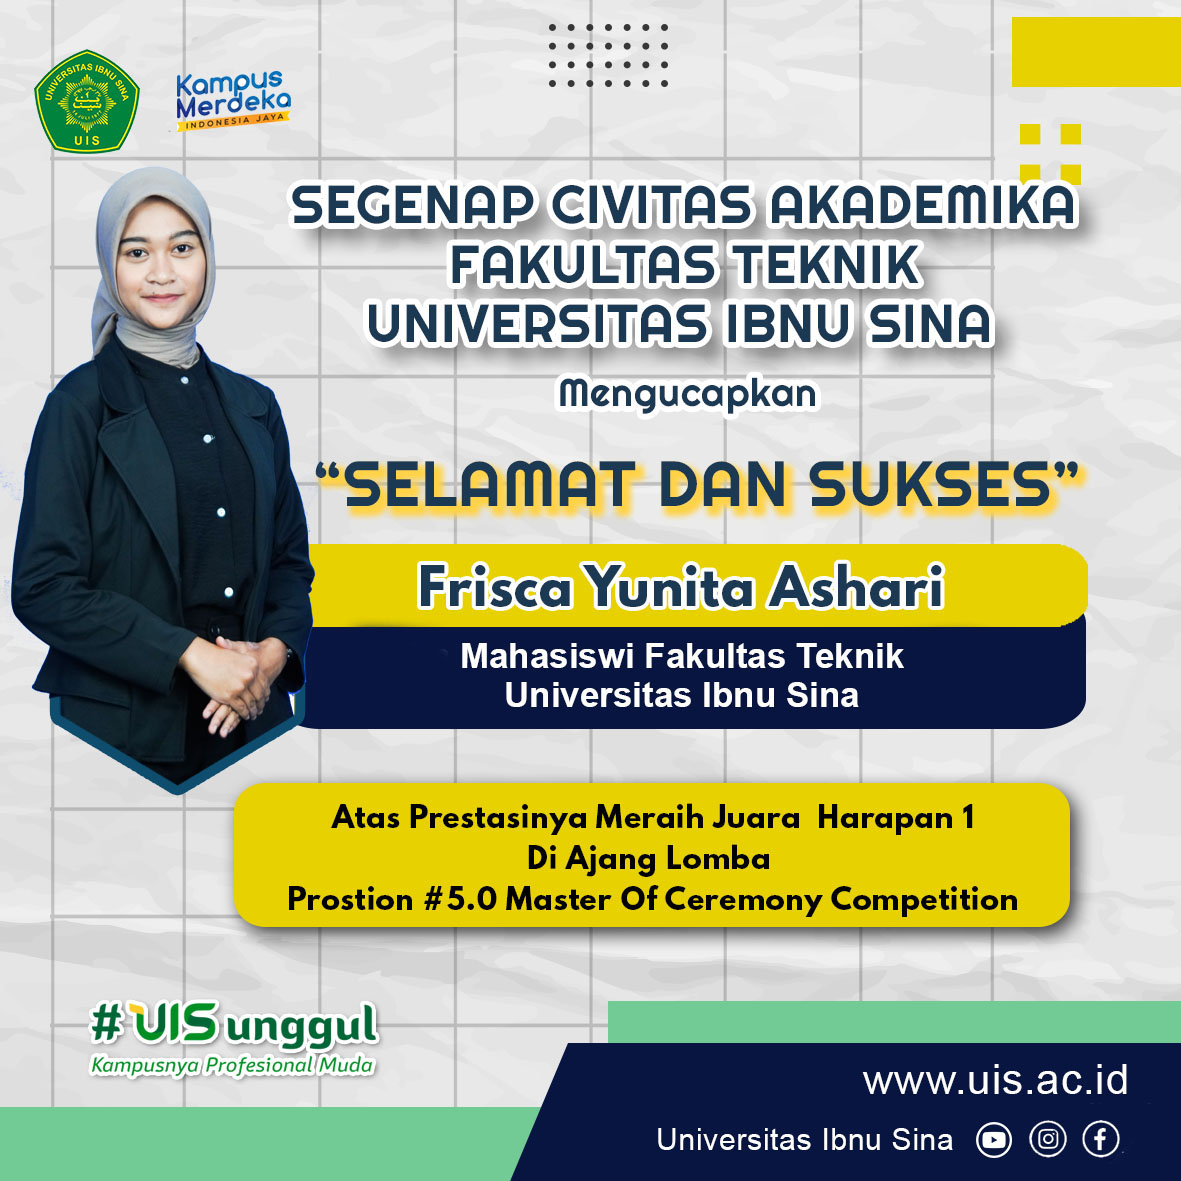 Prostion 5.0 Master of Ceremony Competition